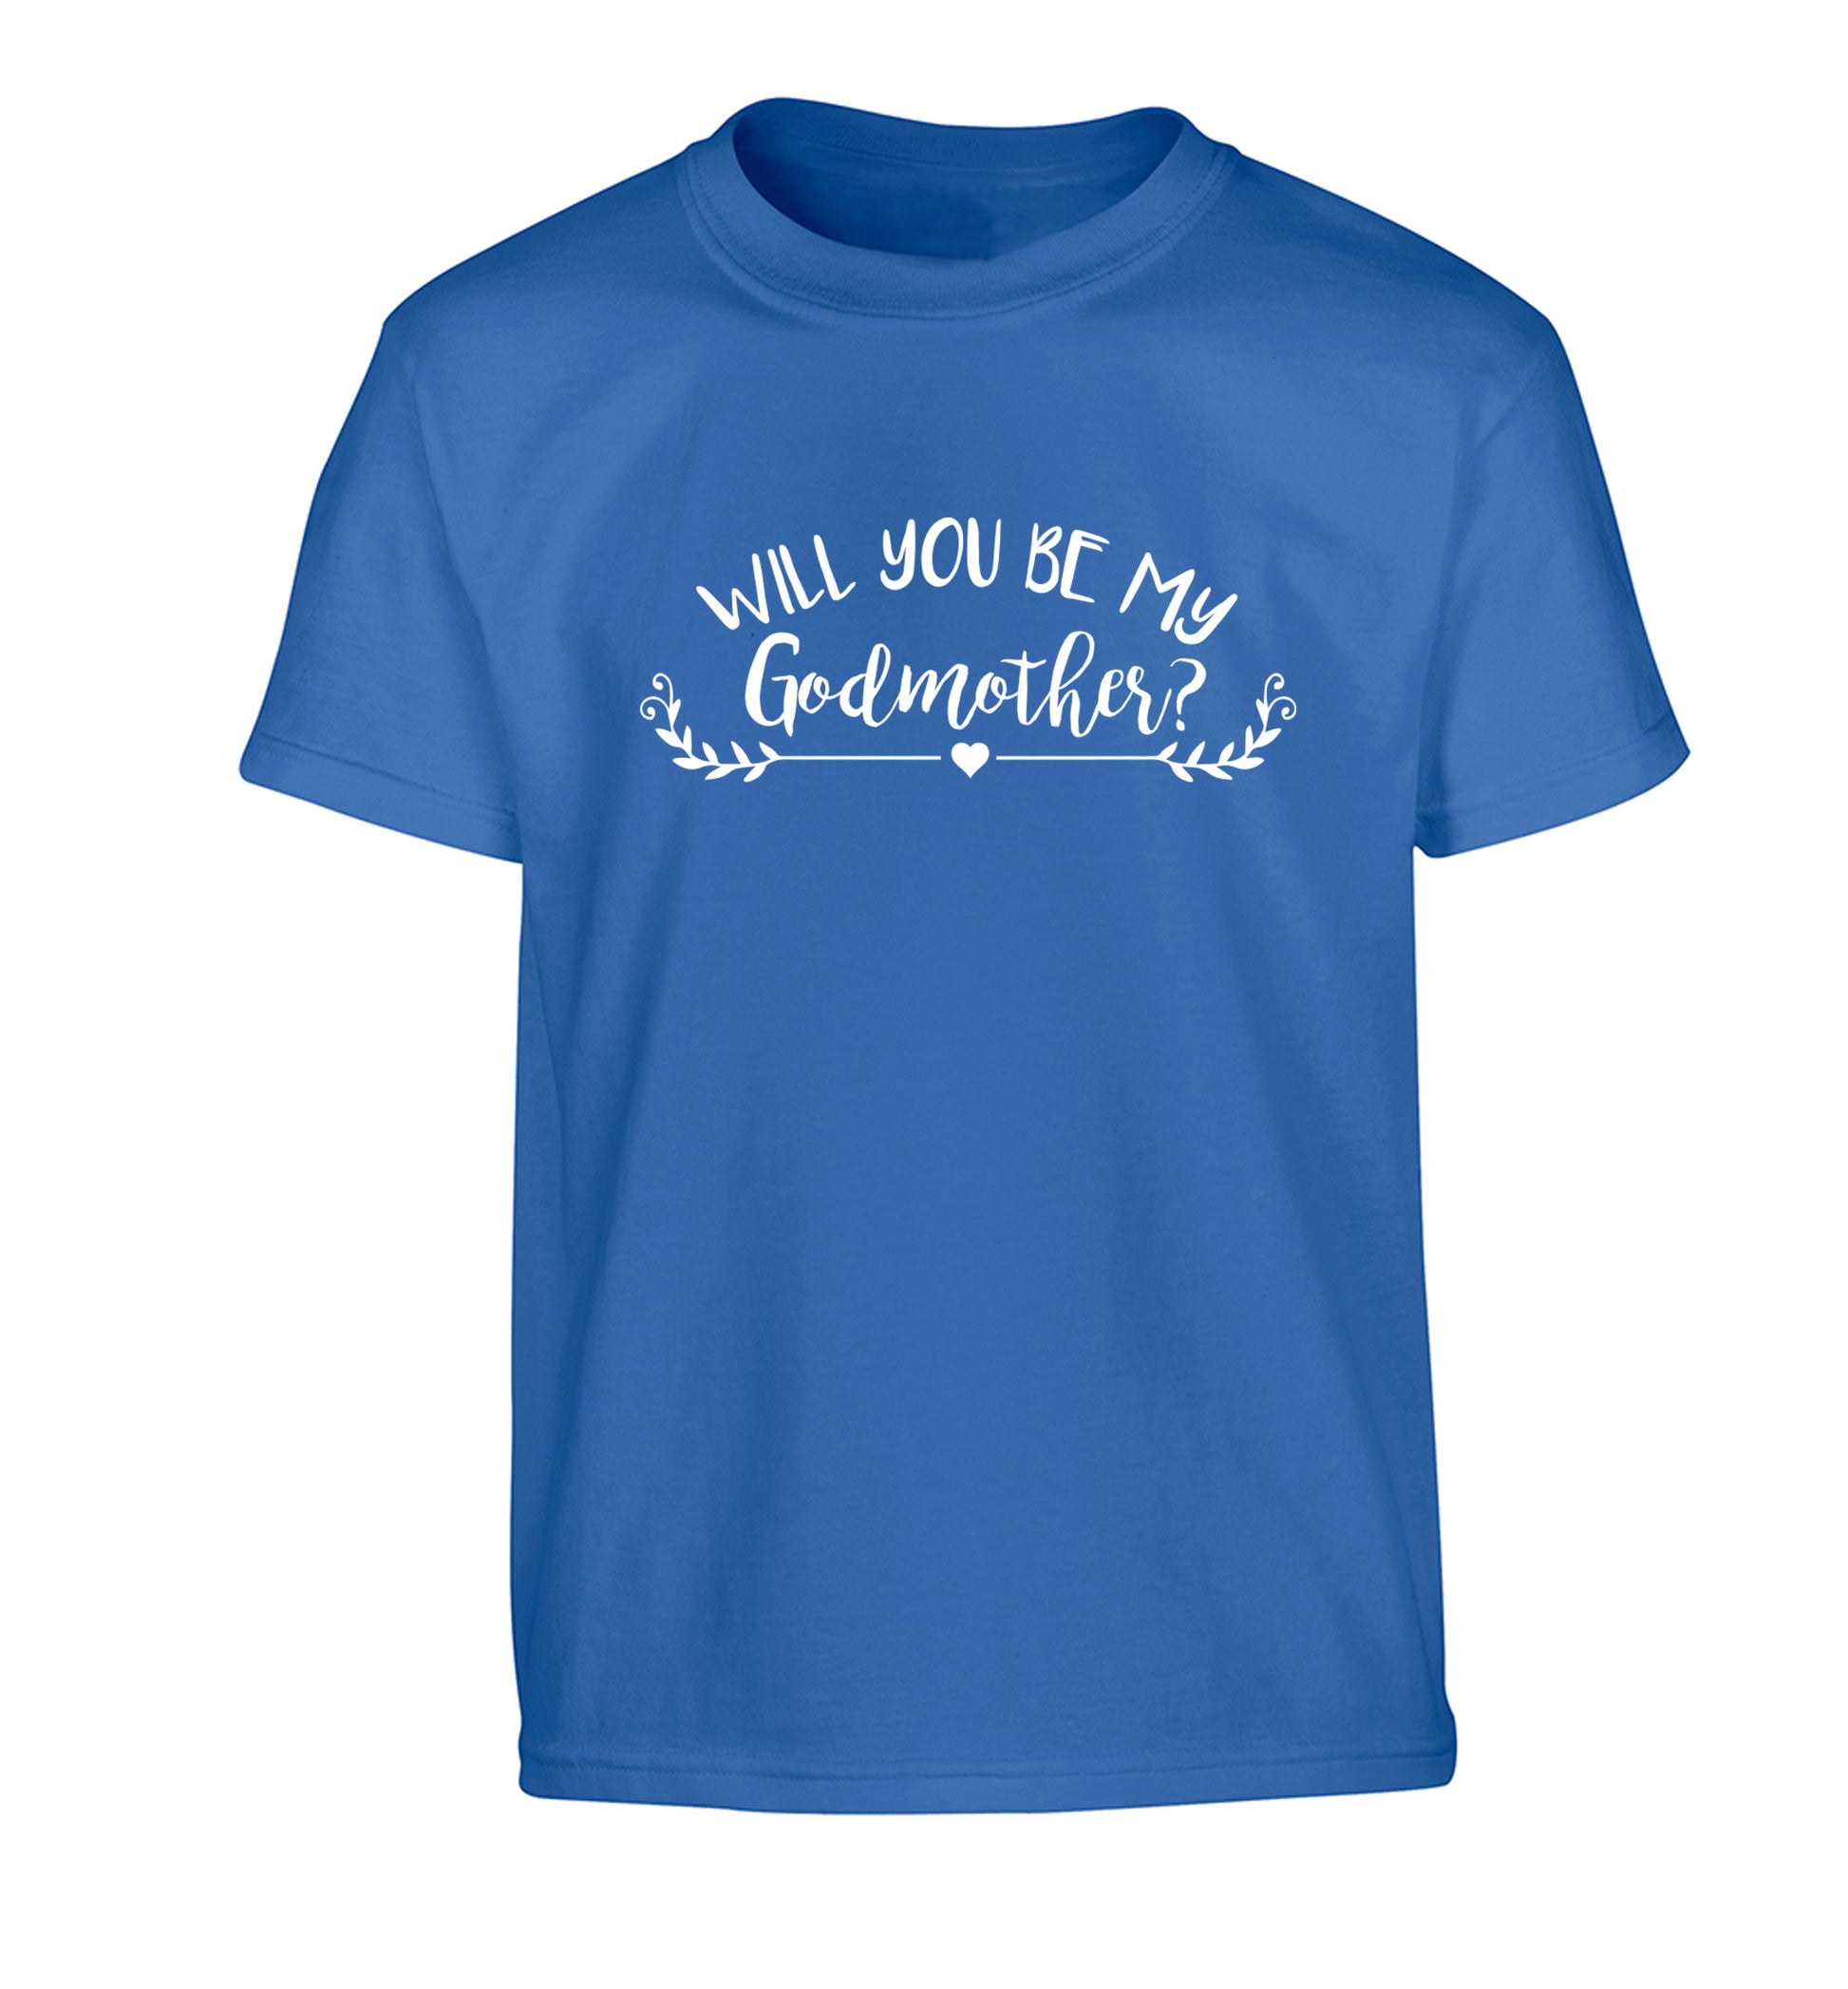 Will you be my godmother? Children's blue Tshirt 12-14 Years